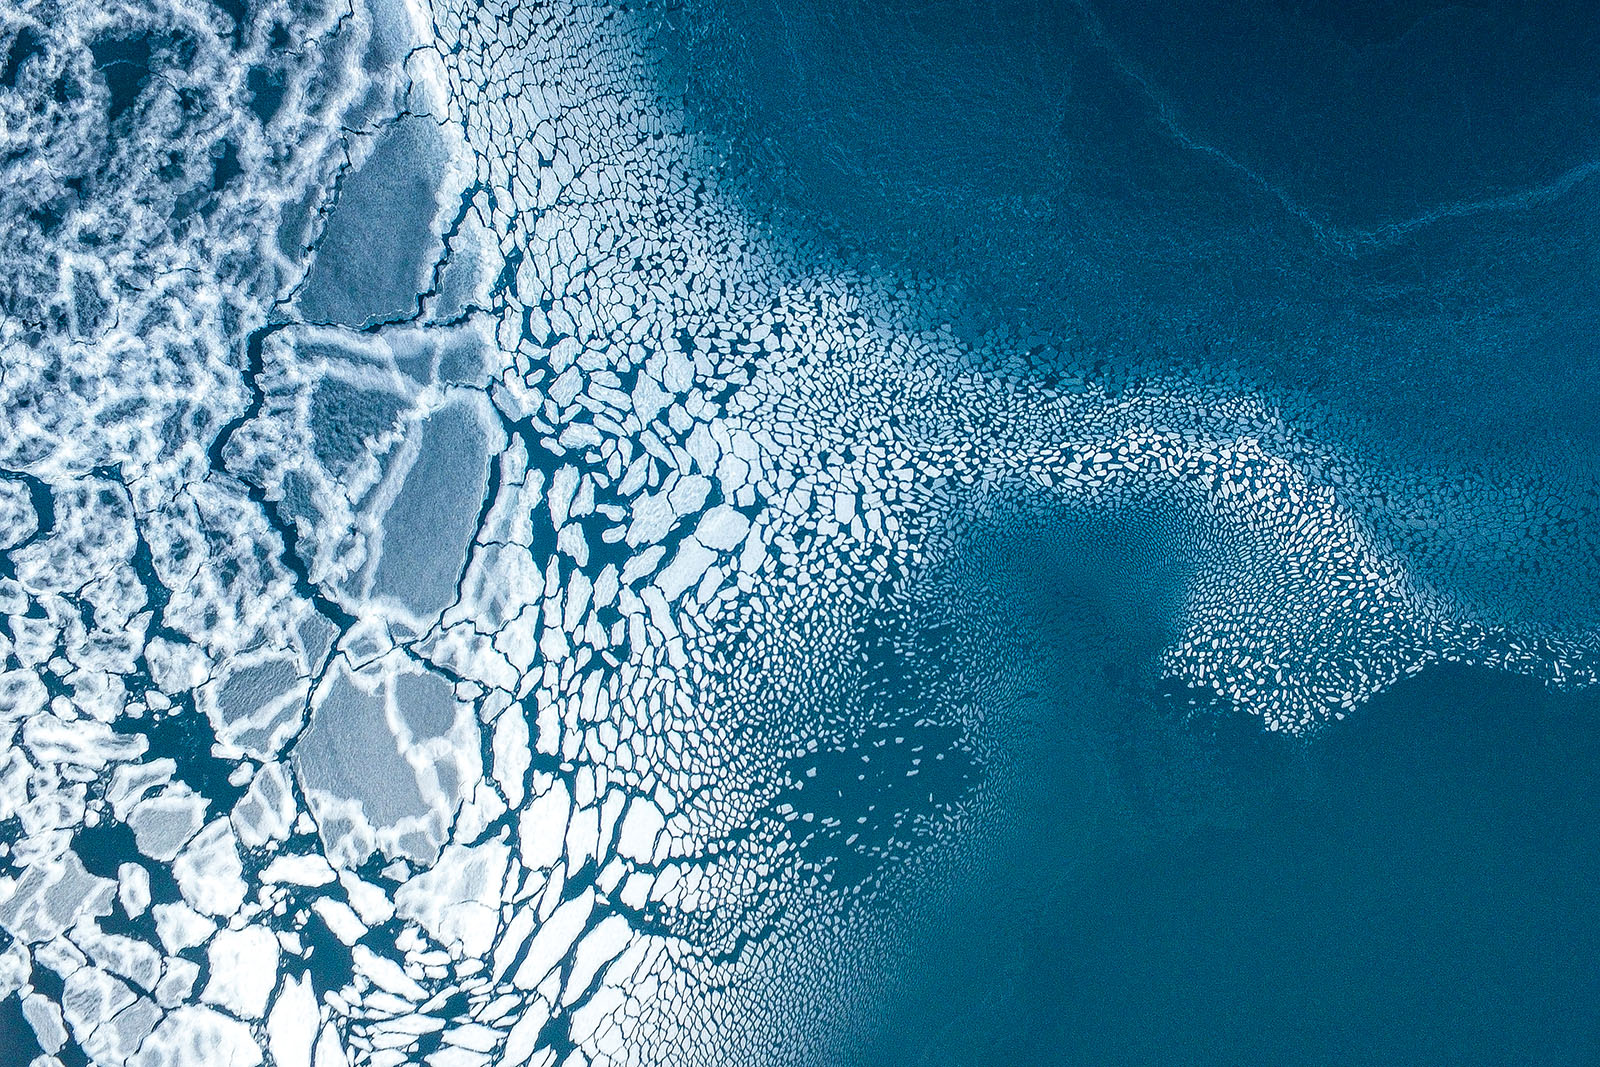 dronestagram photography contest 2017 ice formation